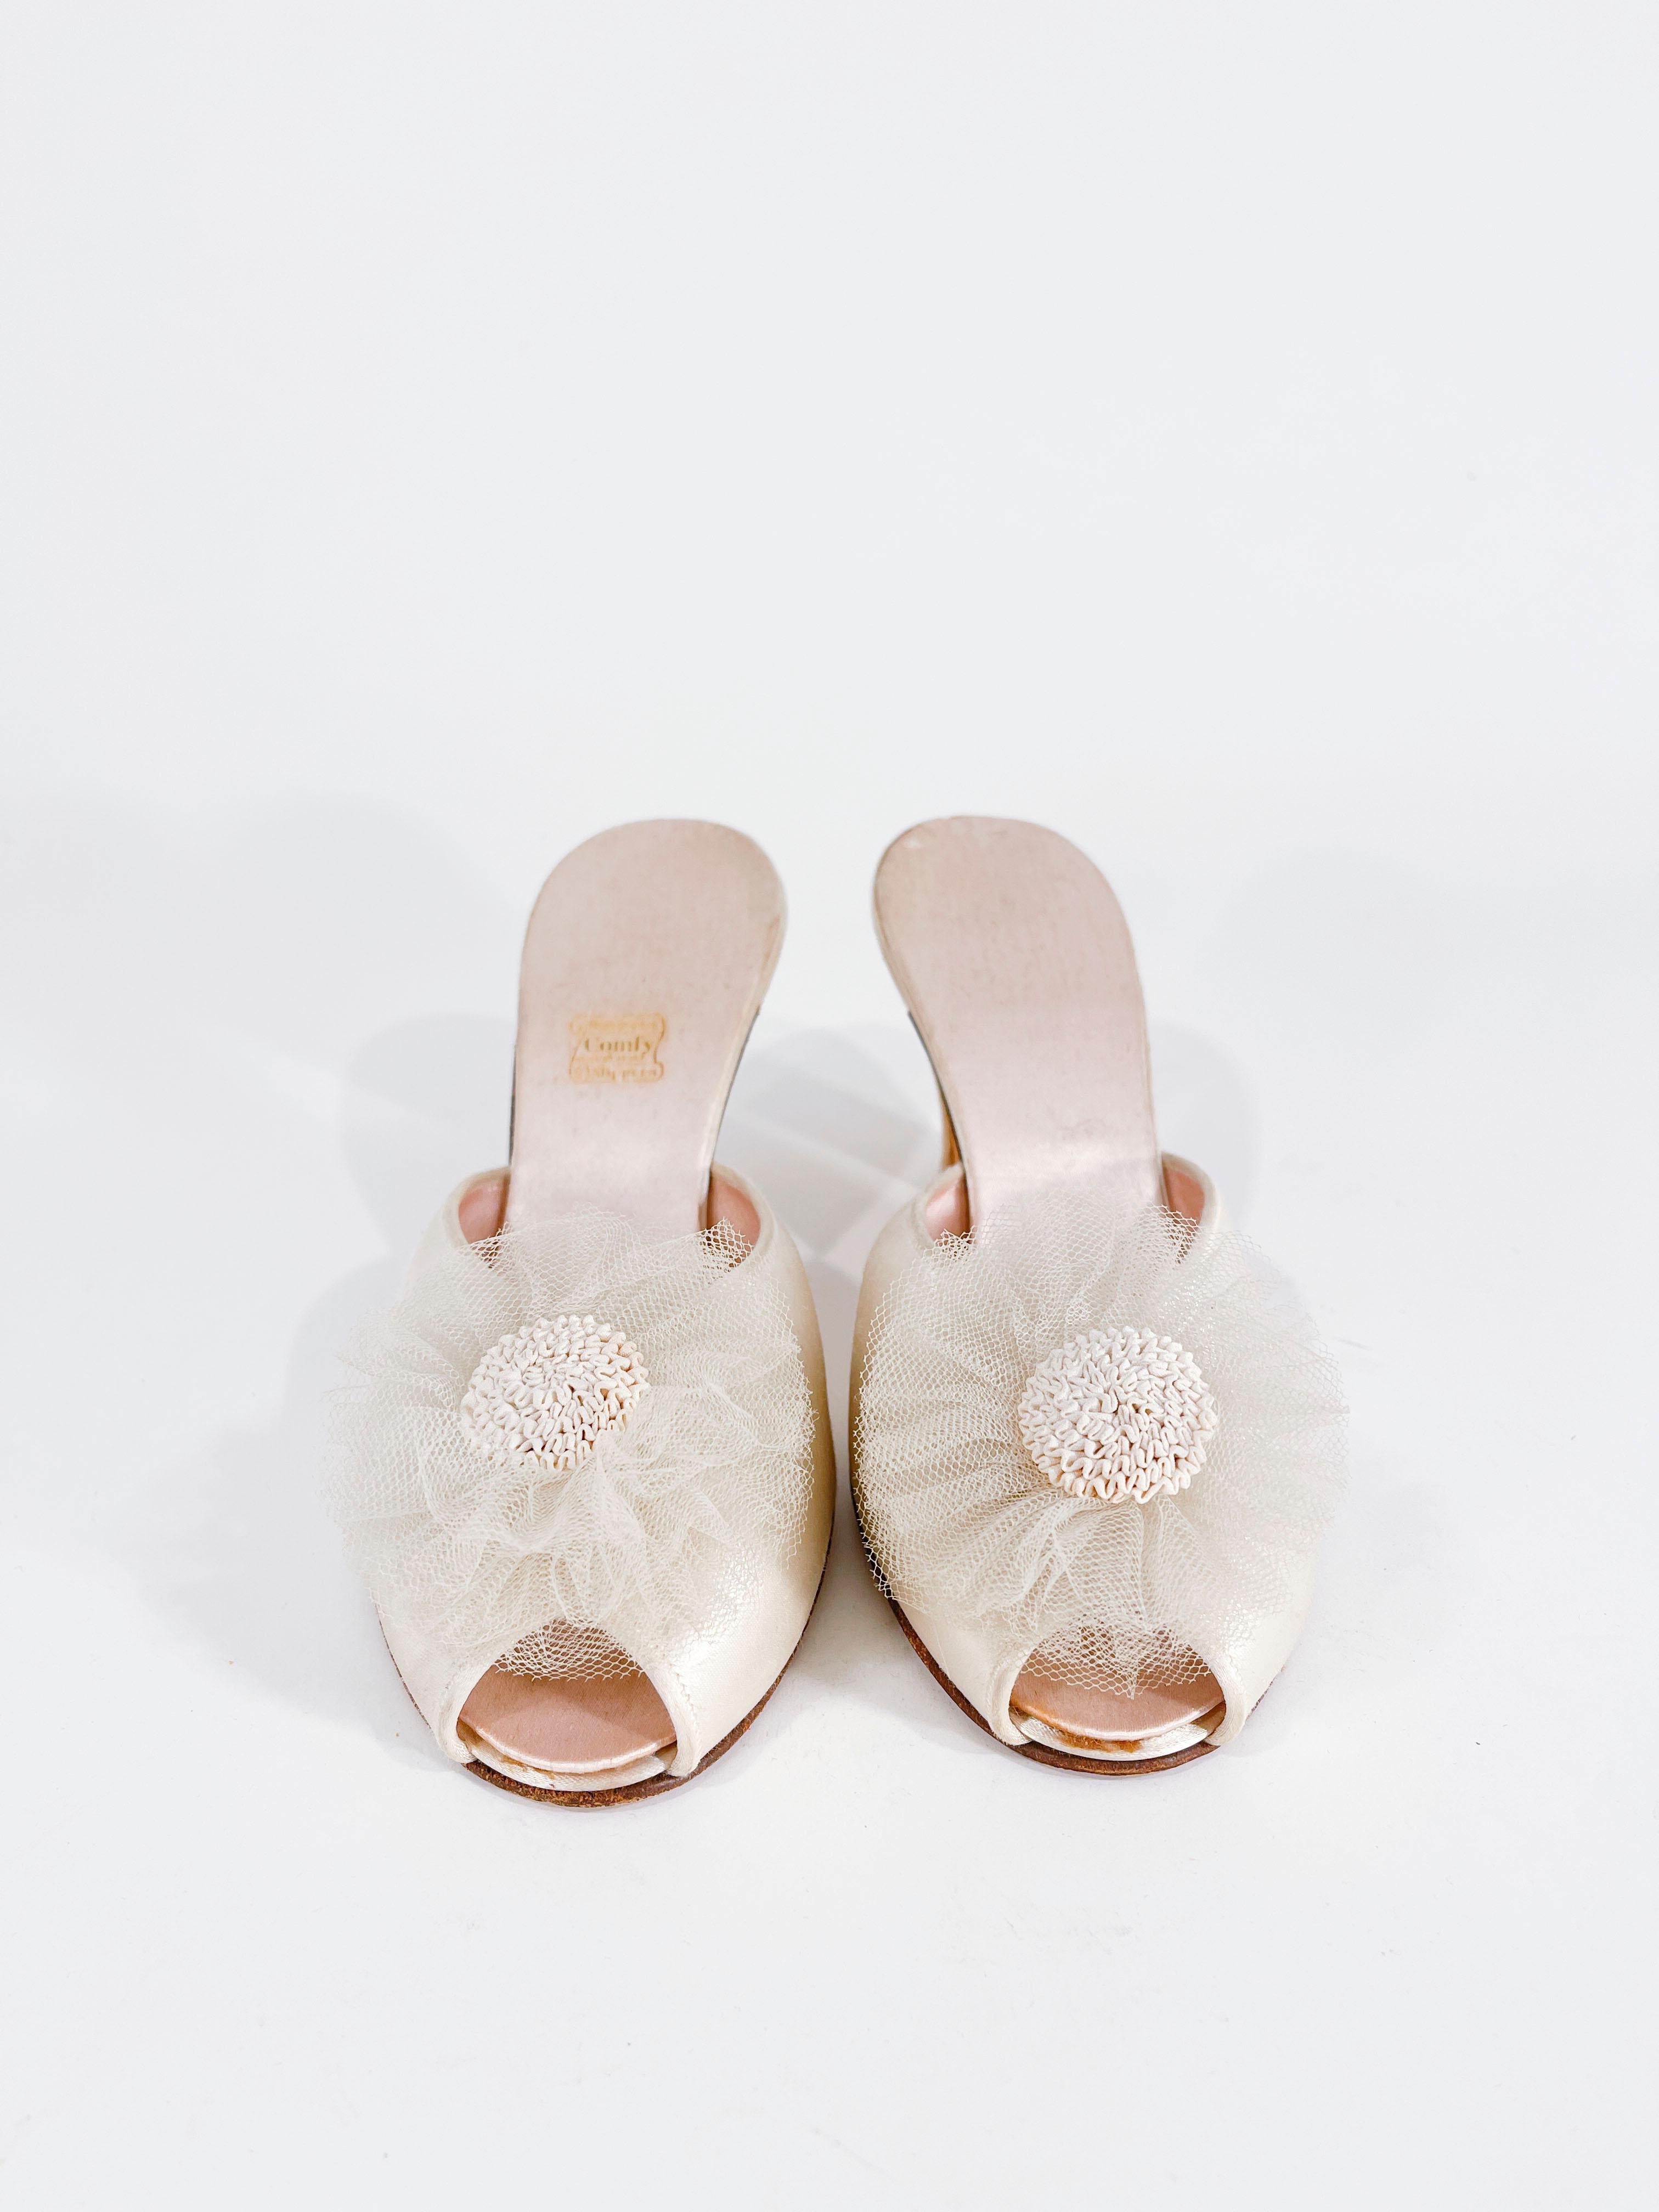 1940s Daniel Green champagne colored satin bedroom slippers with a handmade tulle flower and soustache ribbon center. The interior is also lined with matching champagne colored satin and the soles are made of leather. 